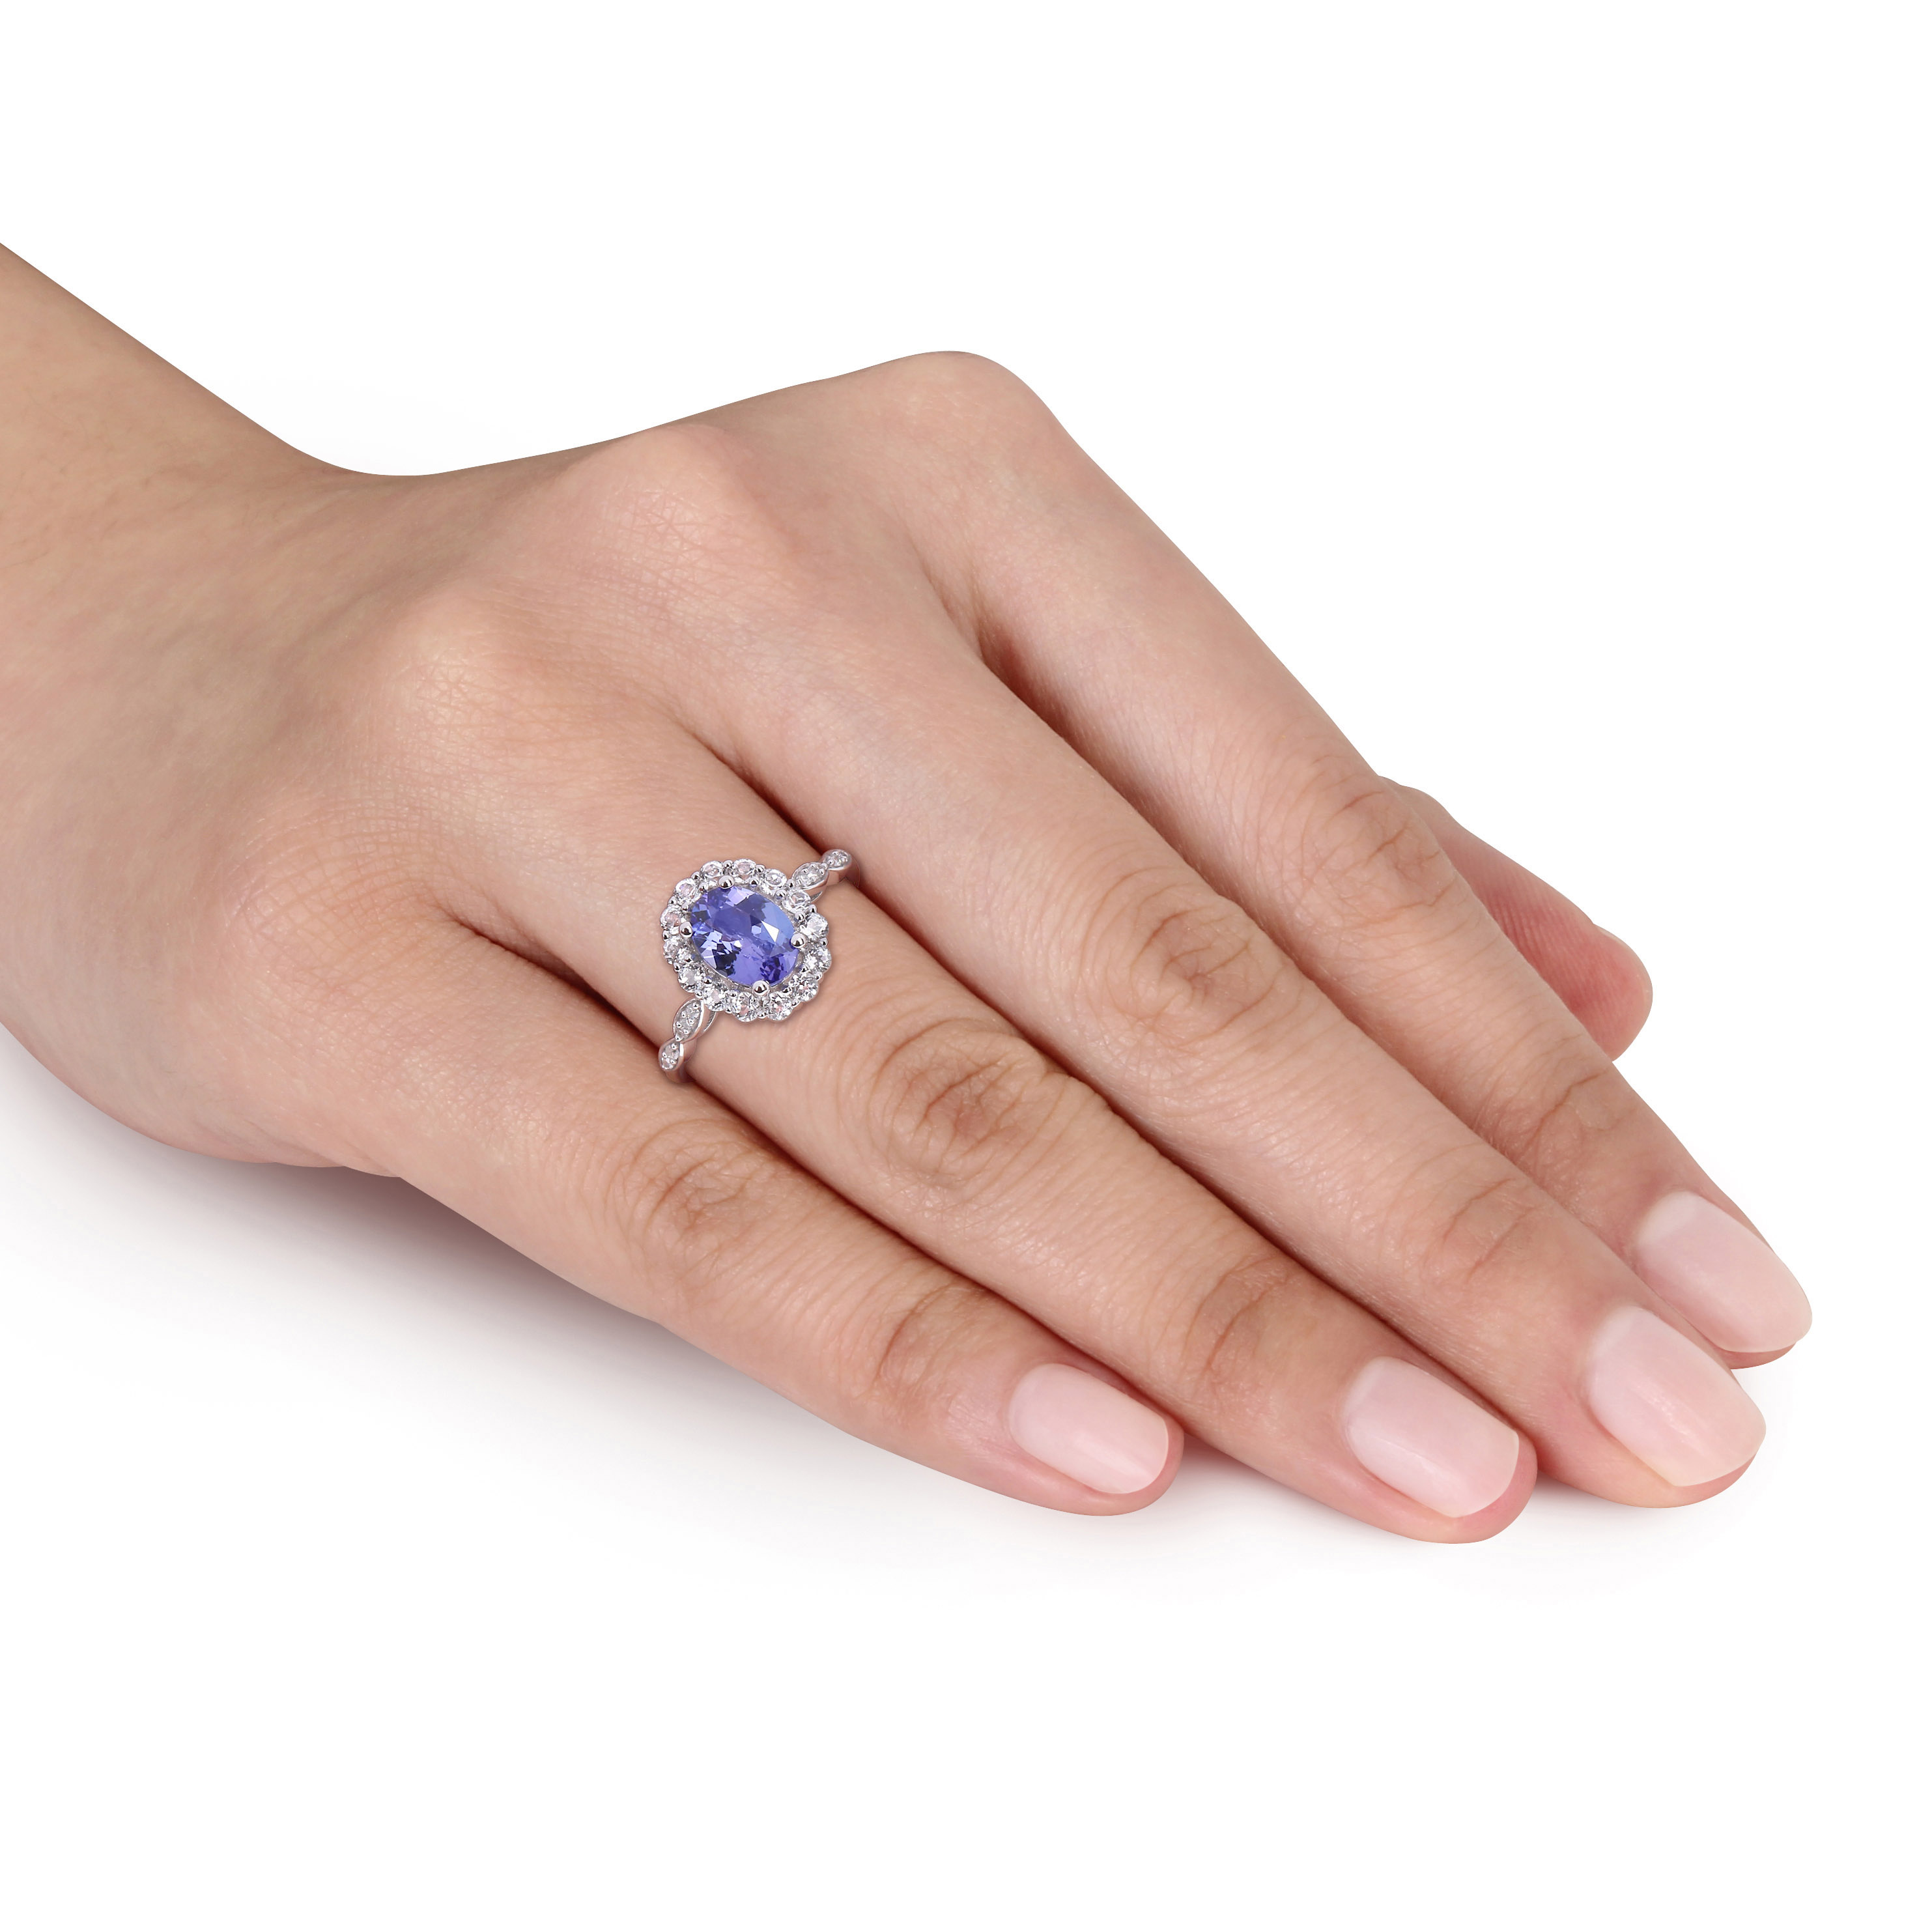 1 7/8 CT TGW Oval Shape Tanzanite, White Topaz and Diamond Accent Vintage Halo Ring in 14k White Gold